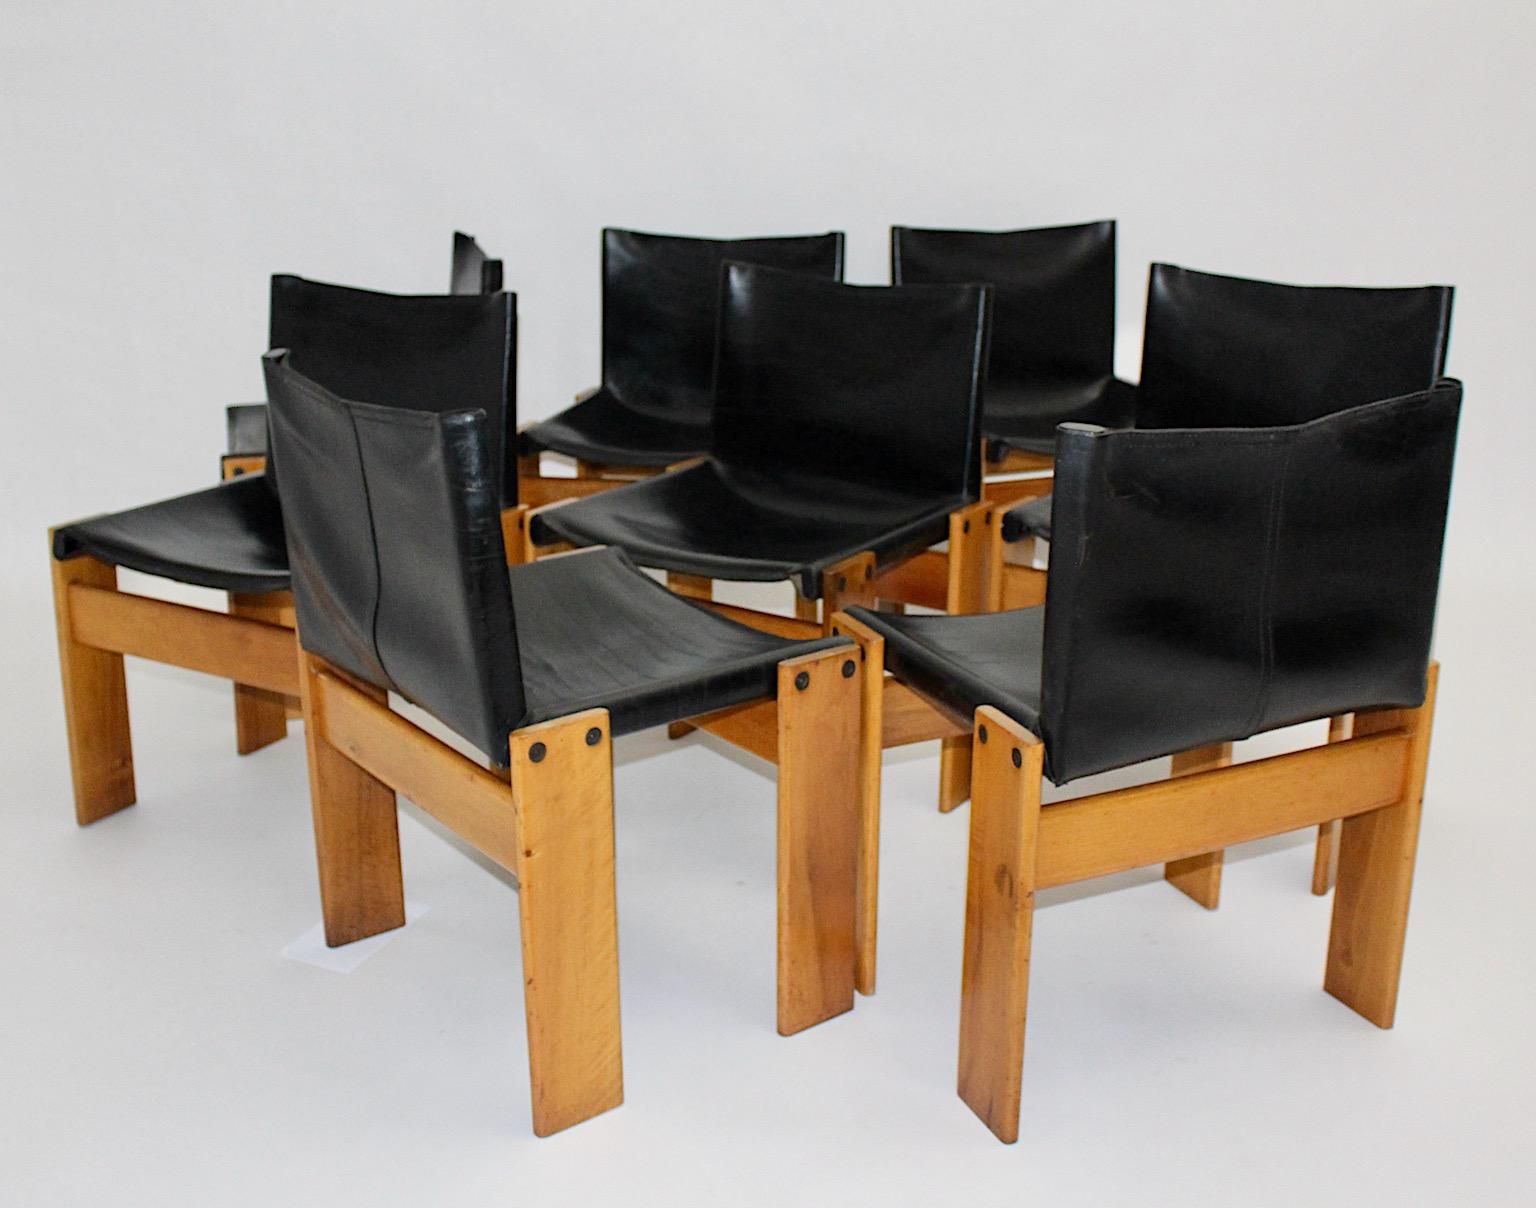 Tobia Scarpa 8 walnut and black leather dining chairs, model Monk, for Molteni, Italy, 1970s.
An iconic set of dining chairs made out of walnut frame in honey brown color tone and black stitched saddle leather seat shell.
The dining chairs are in